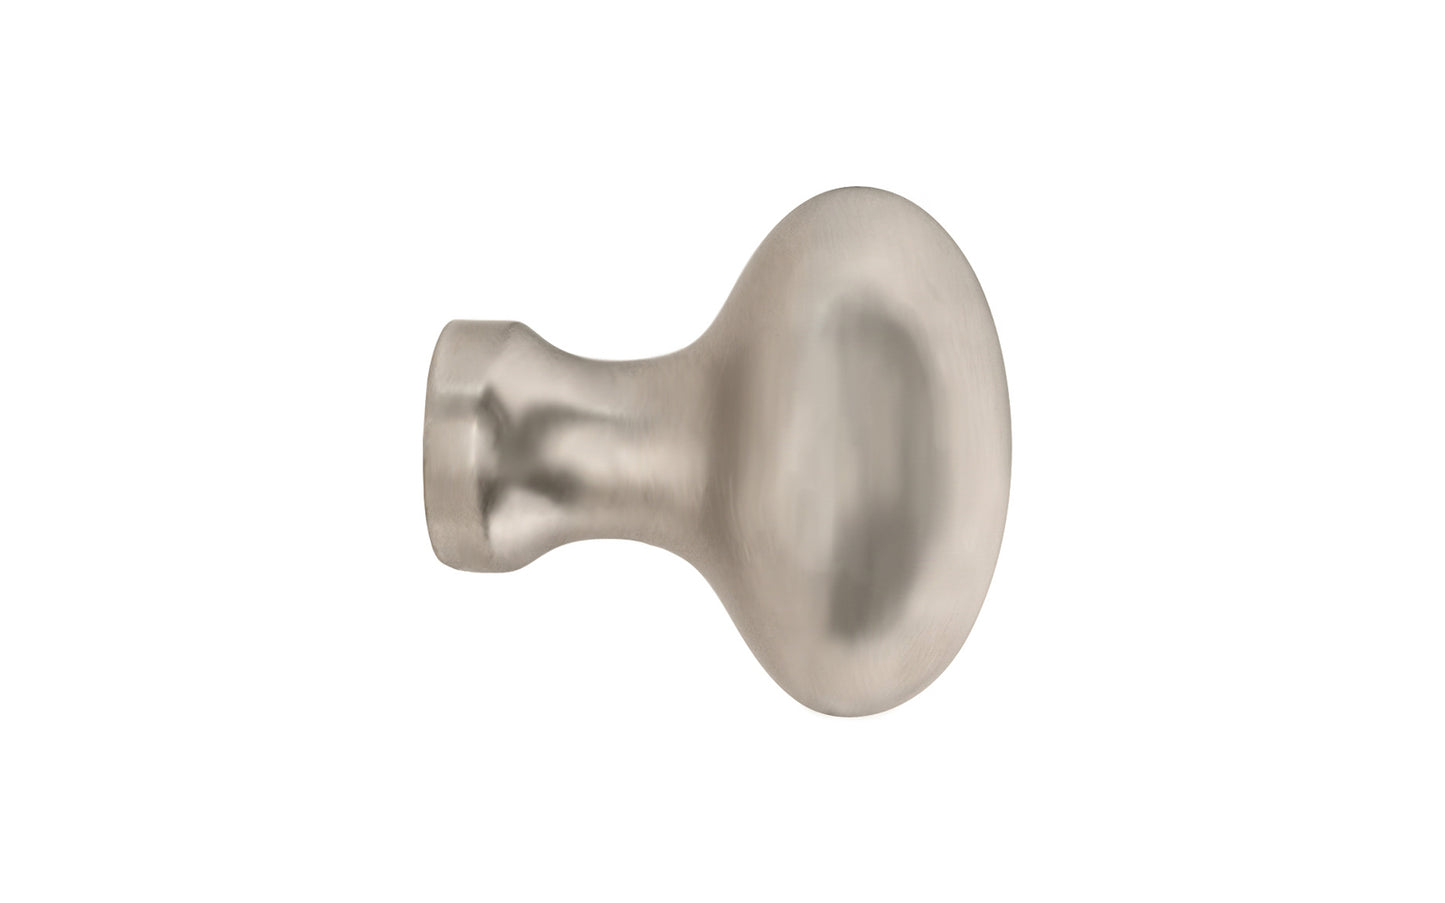 Vintage-style Hardware · Classic & Traditional Solid Brass Cabinet Oval Knob. 1-1/4" length size knob. Quality solid brass core, this stylish knob has a smooth & weighty fee. May be mounted vertically or horizontally. Great for kitchens, bathrooms, on furniture, cabinets, drawers, small doors, cabinet doors. Brushed Nickel Finish.